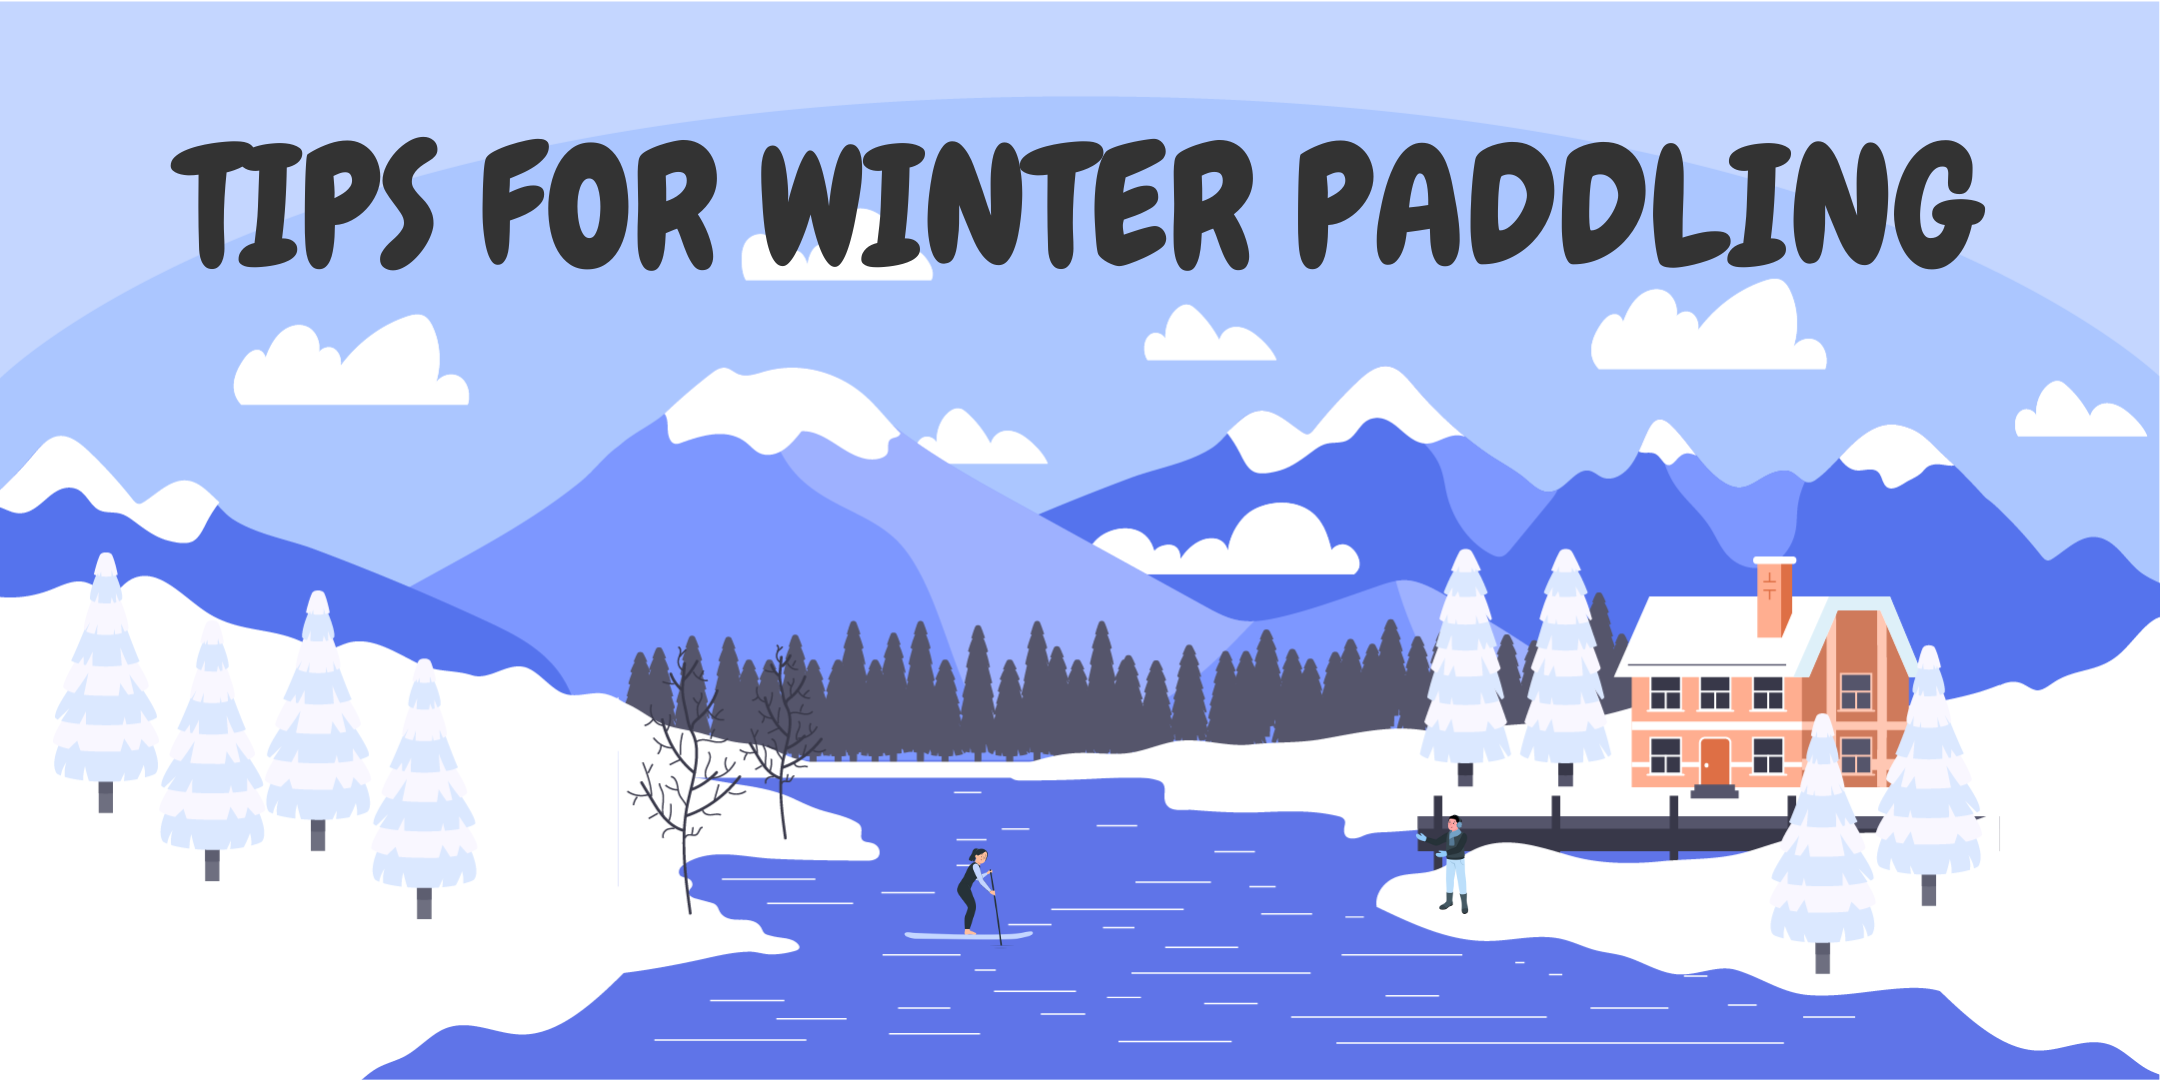 Winter Paddling and Safety Guidance